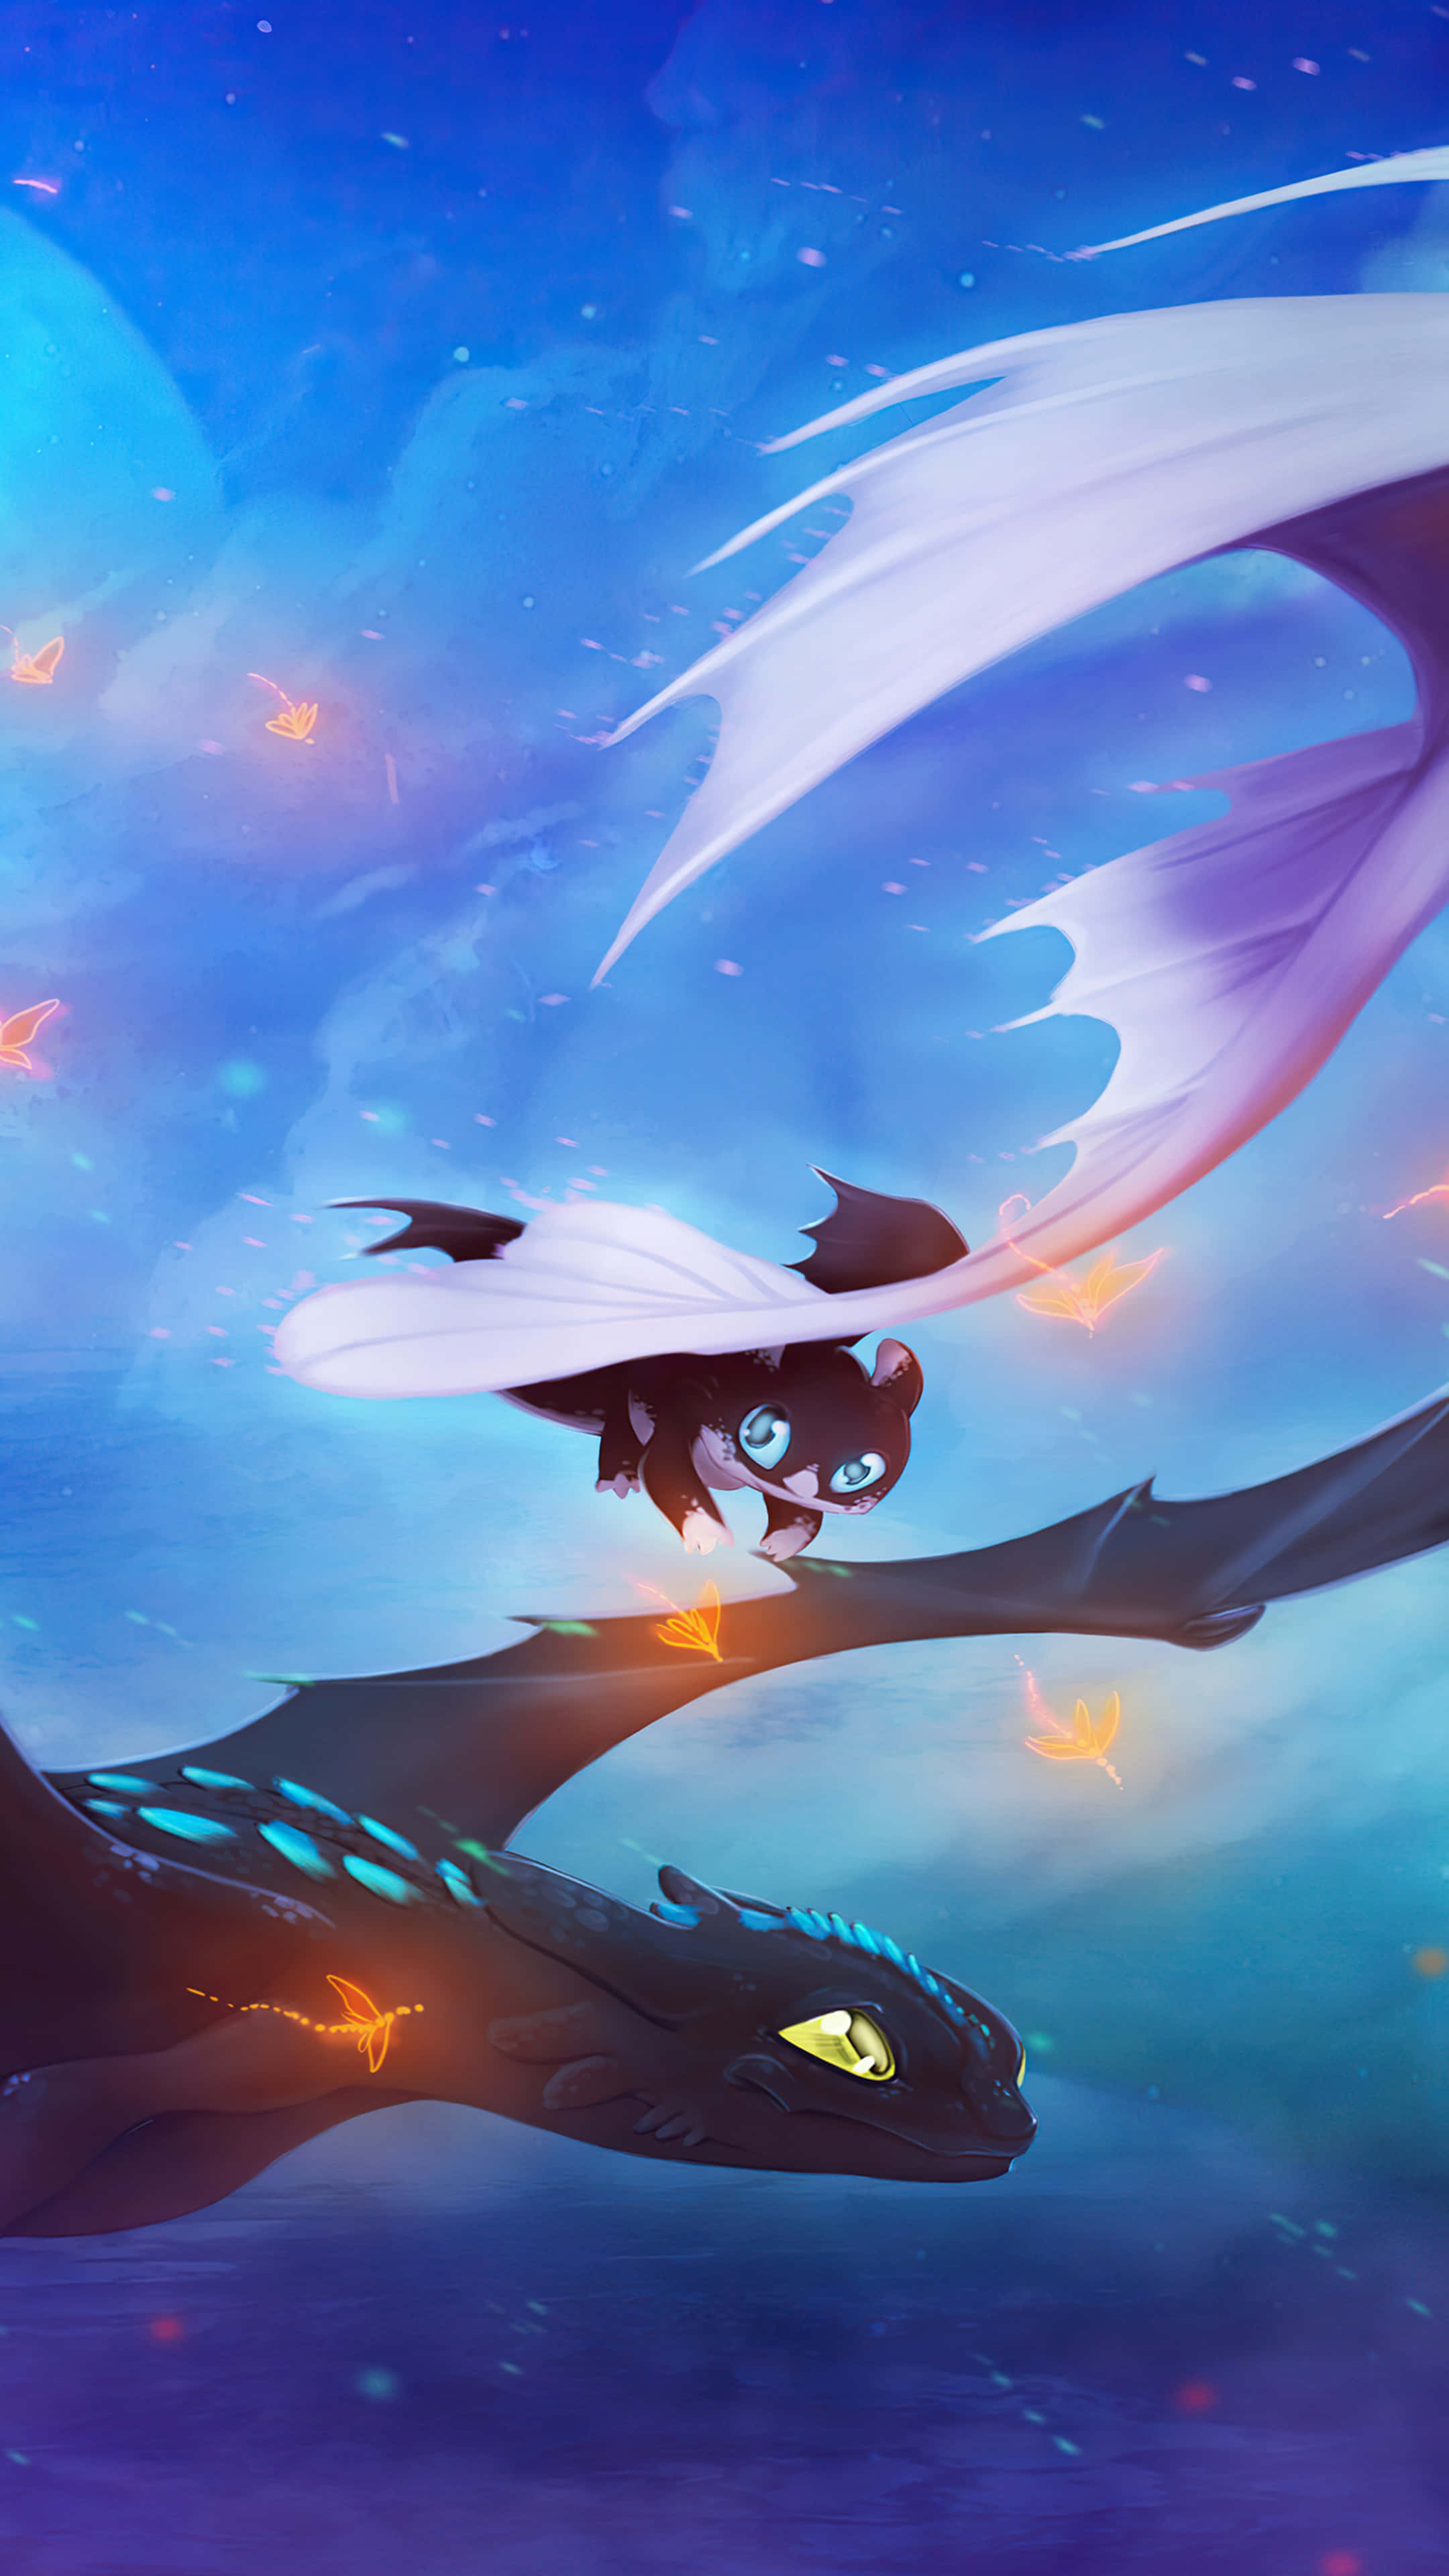 Take flight with How to Train Your Dragon in stunning 4K resolution! Wallpaper